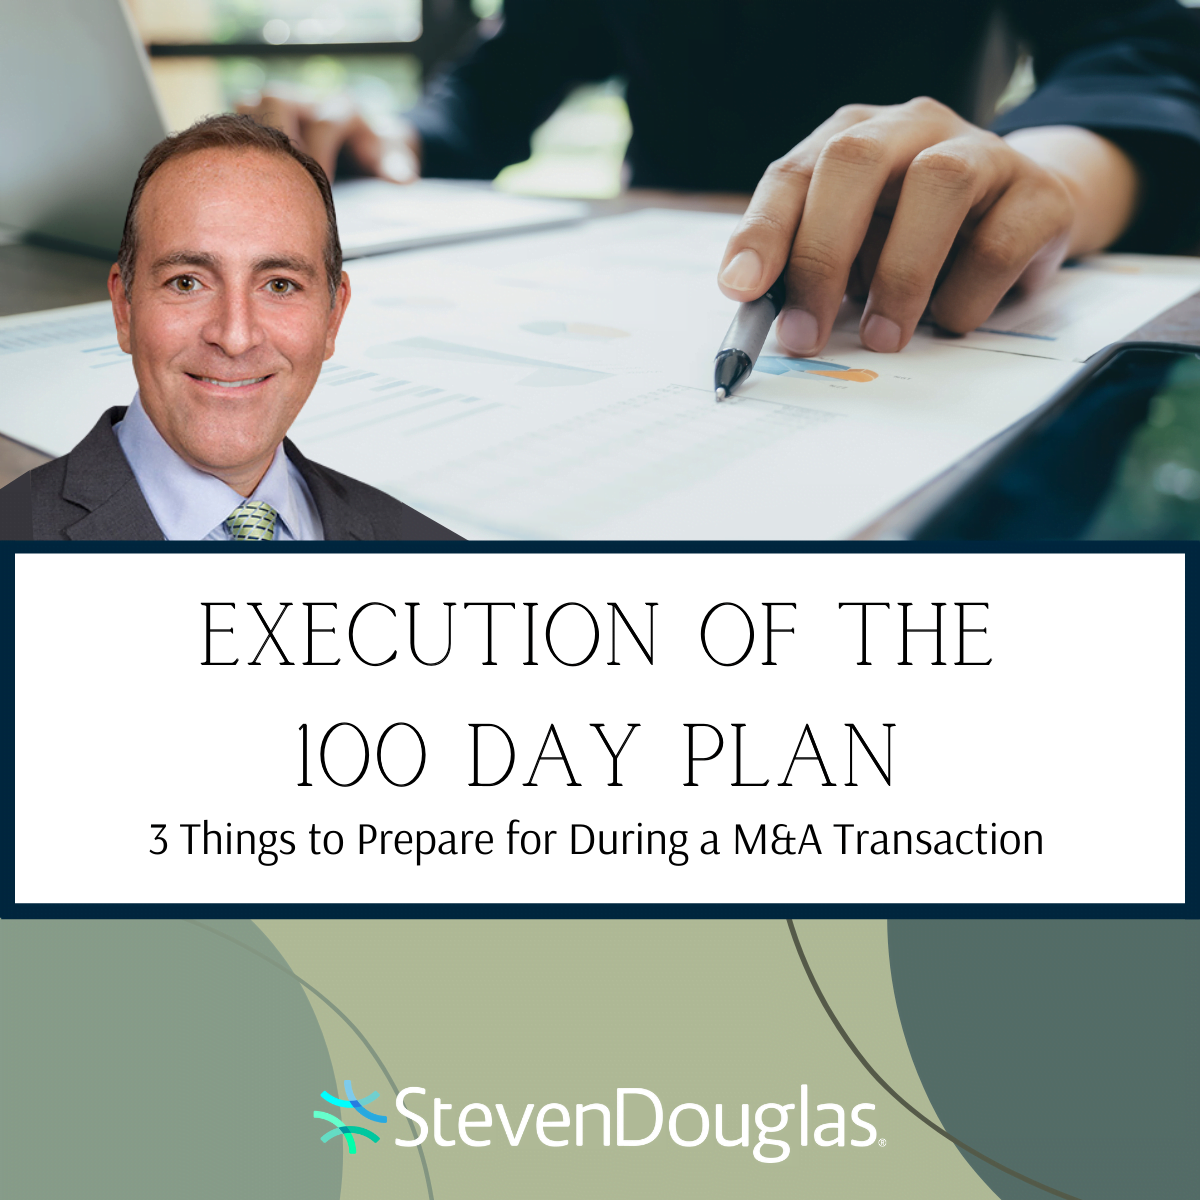 Execution of the 100 Day Plan